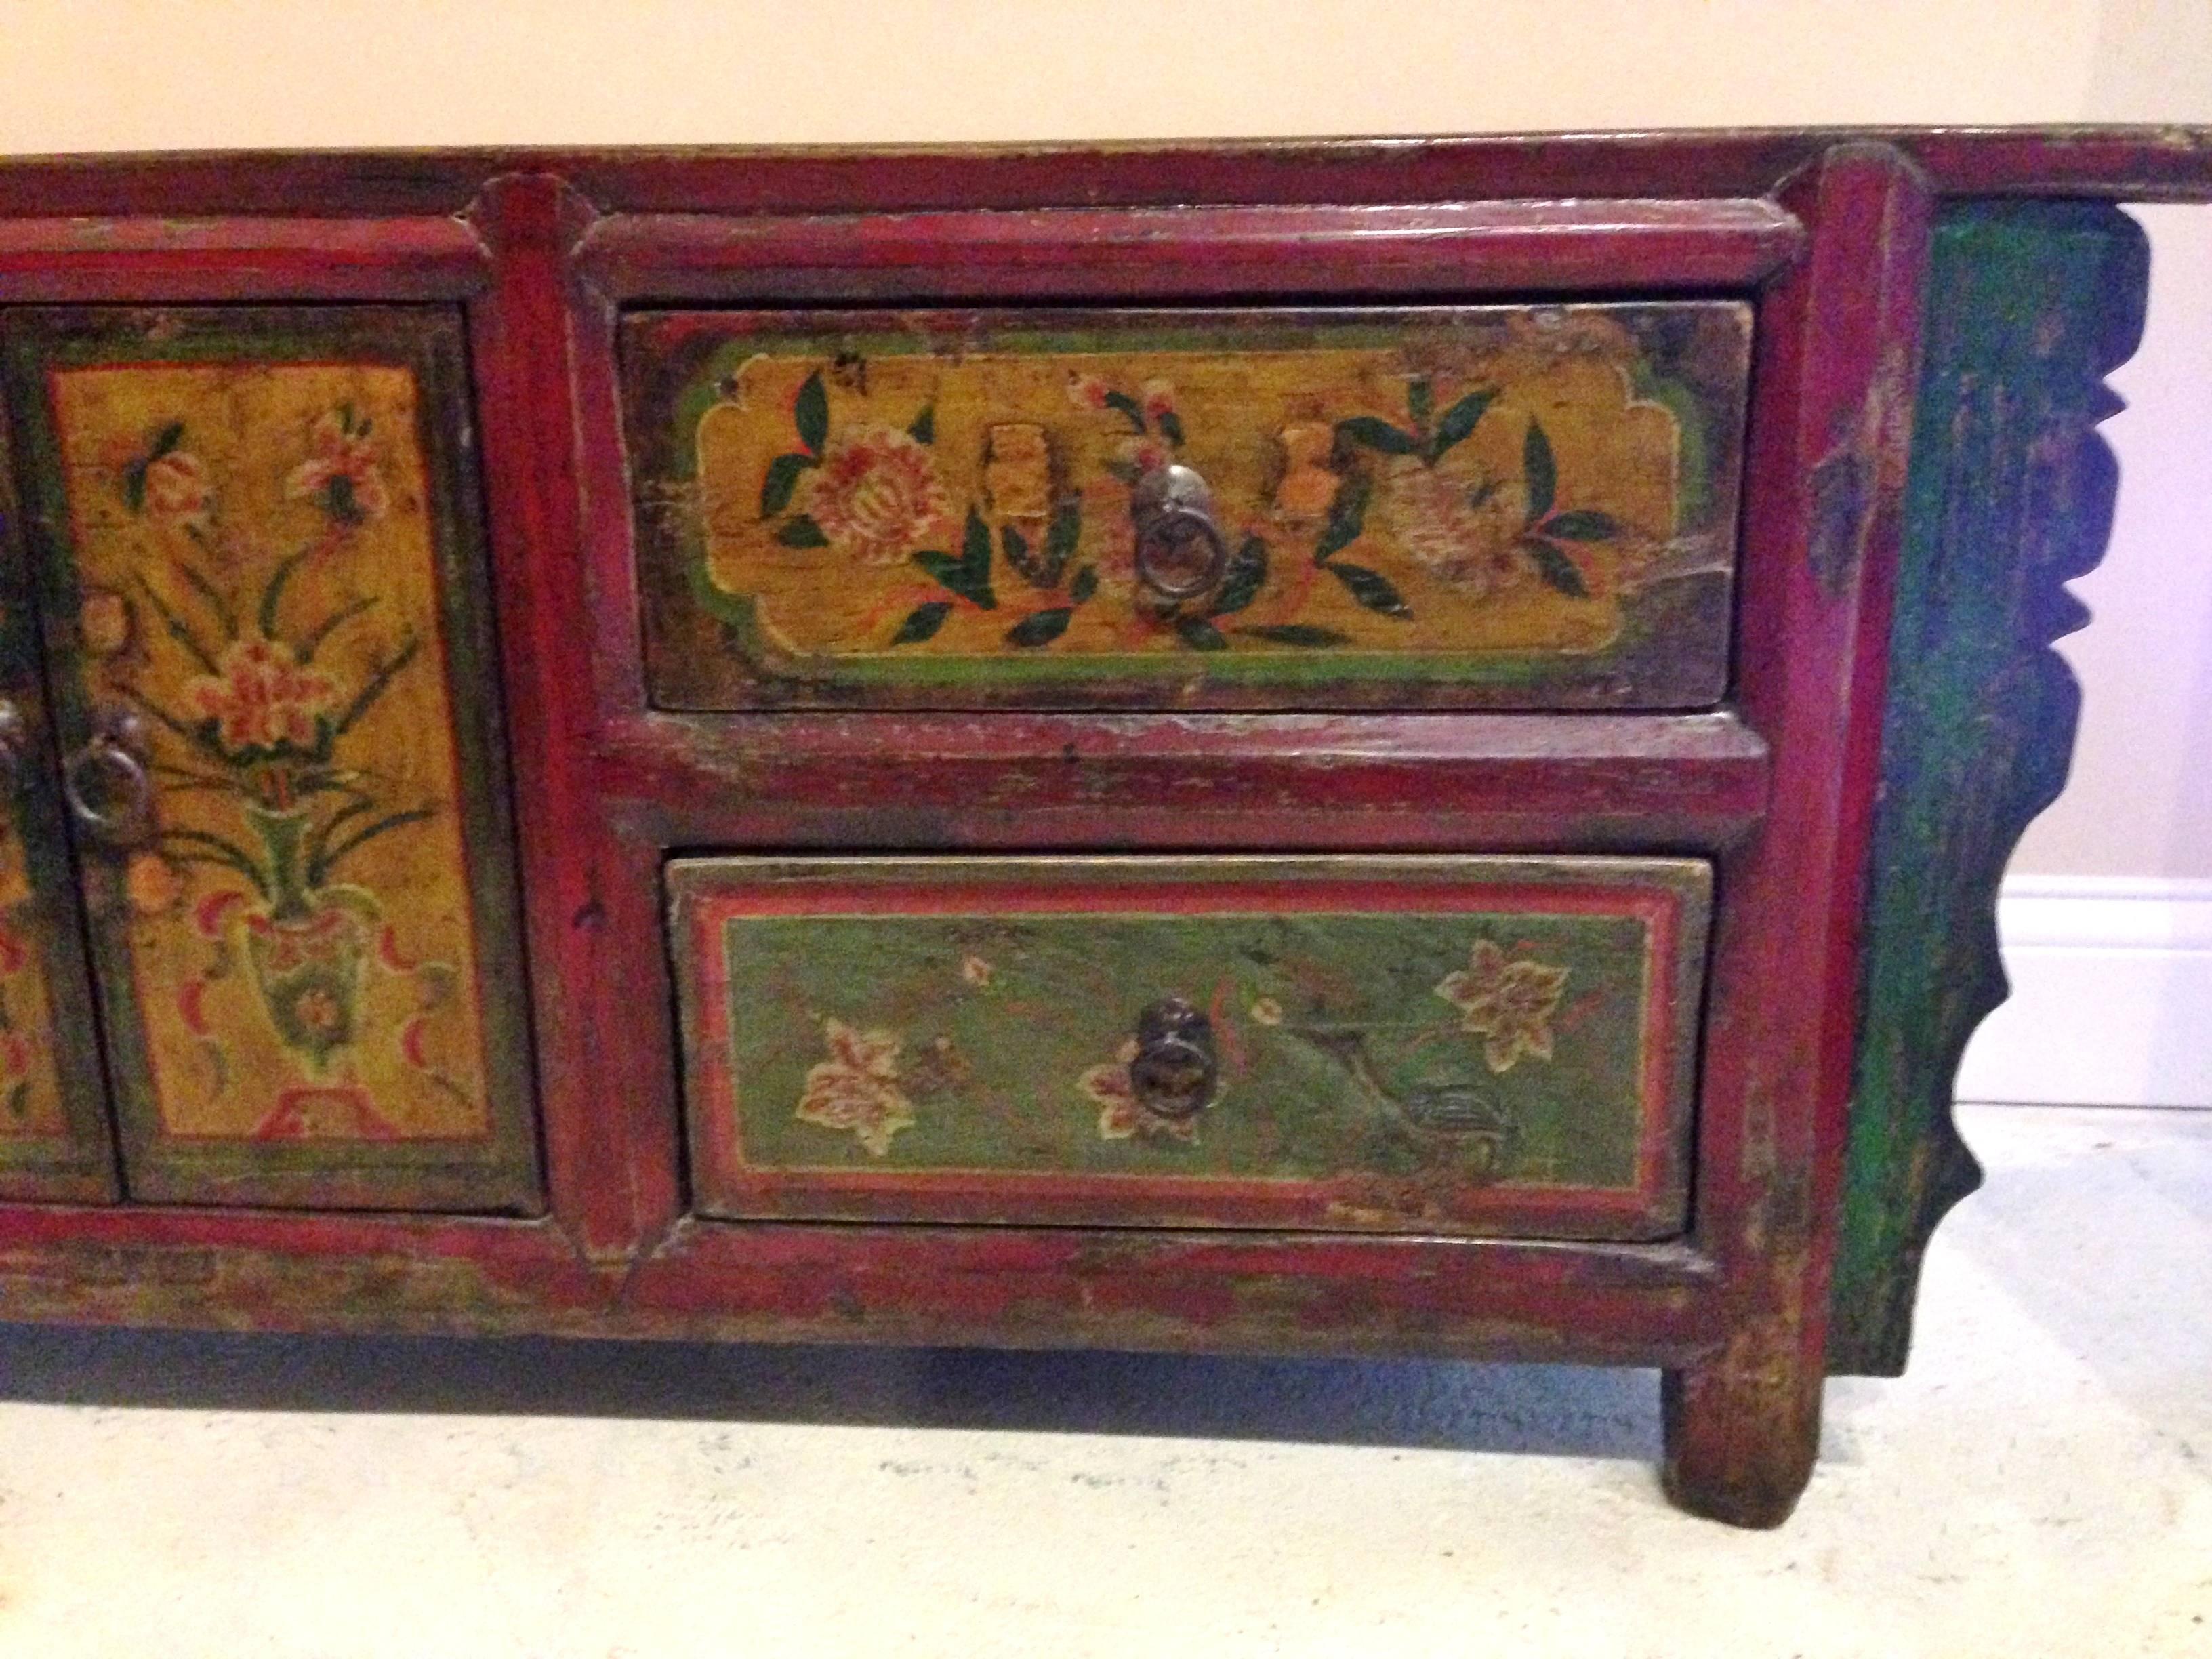 A beautifully painted chest from China's tribal village. 

The colors are simply splendid. The use of saffron and sage color is unexpected and refreshing. These colors derived from minerals and plants. Fantastic, exotic colors express happy